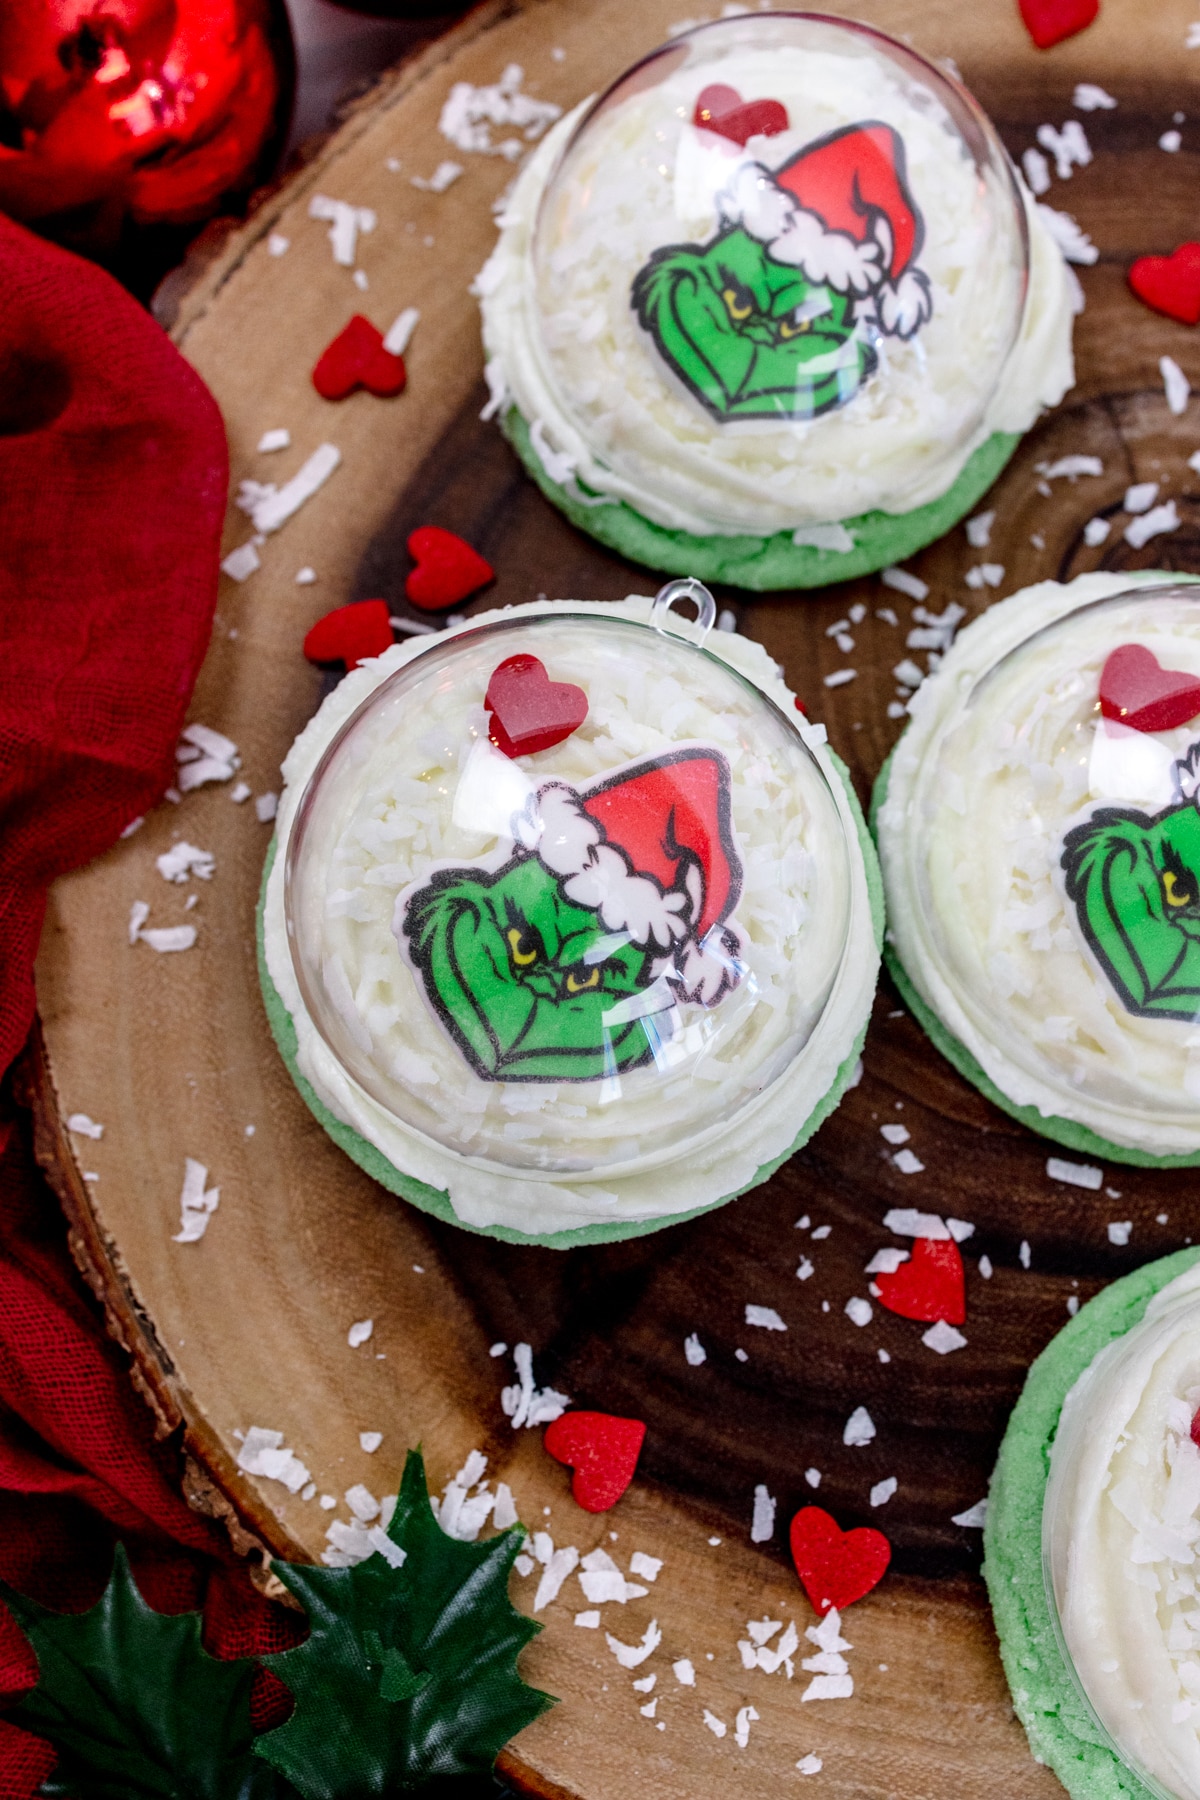 Grinch Snow Globe Cookies on tray